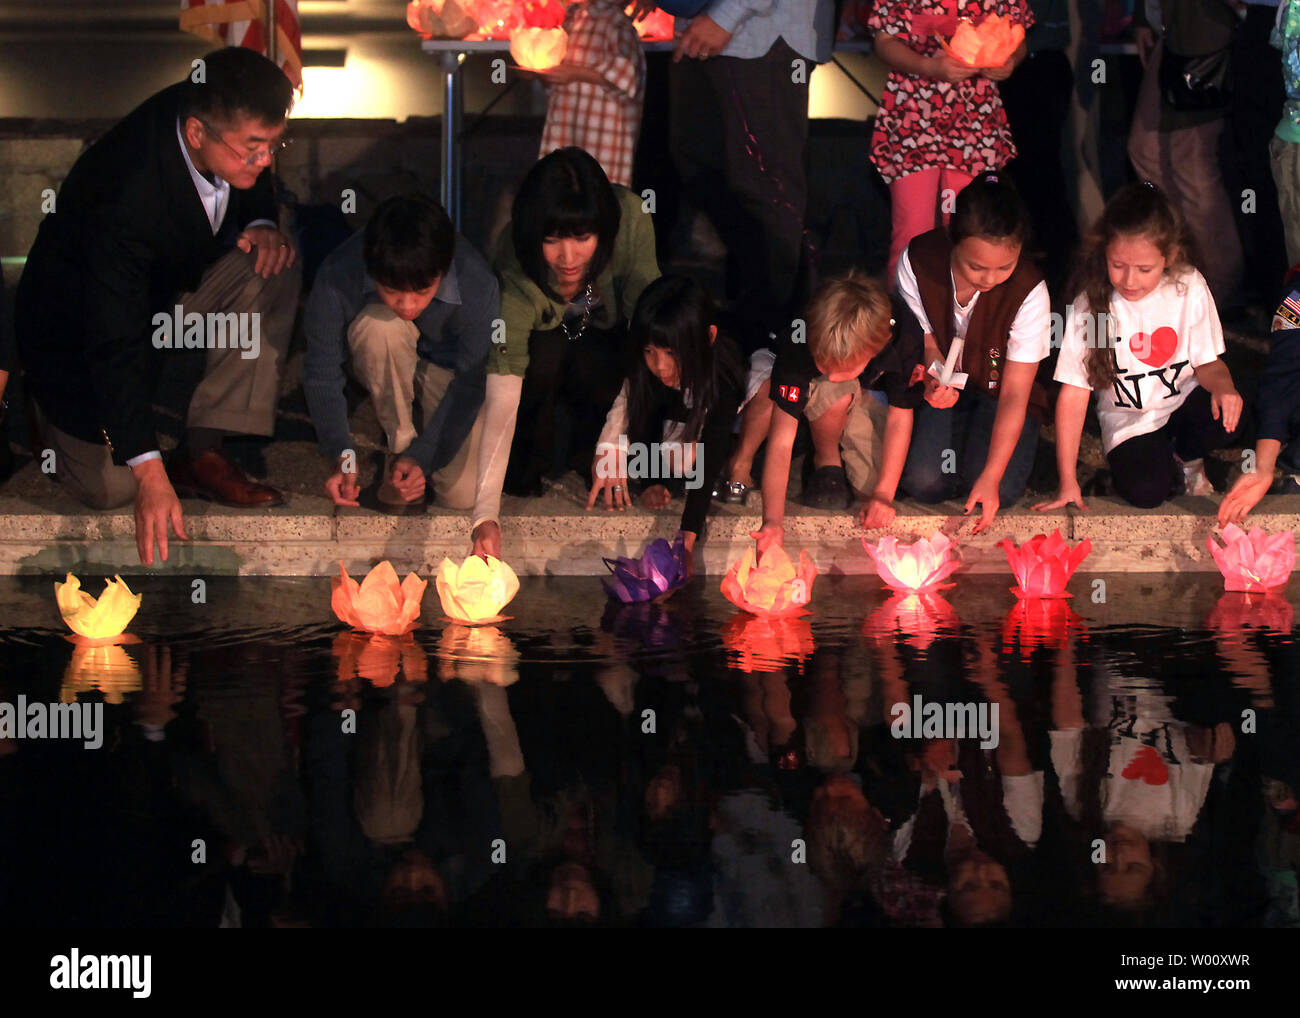 New U.S. Ambassador to China Gary Locke (L) and American guests place floating candles onto a reflecting pool to pay respects to the victims of the 9/11 attacks during a memorial service on the grounds of  the U.S. embassy in Beijing on September 11, 2011.   Sunday marks the 10th anniversary of the 9/11 attacks that brought down the World Trade Center towers in New York.      UPI/Stephen Shaver Stock Photo